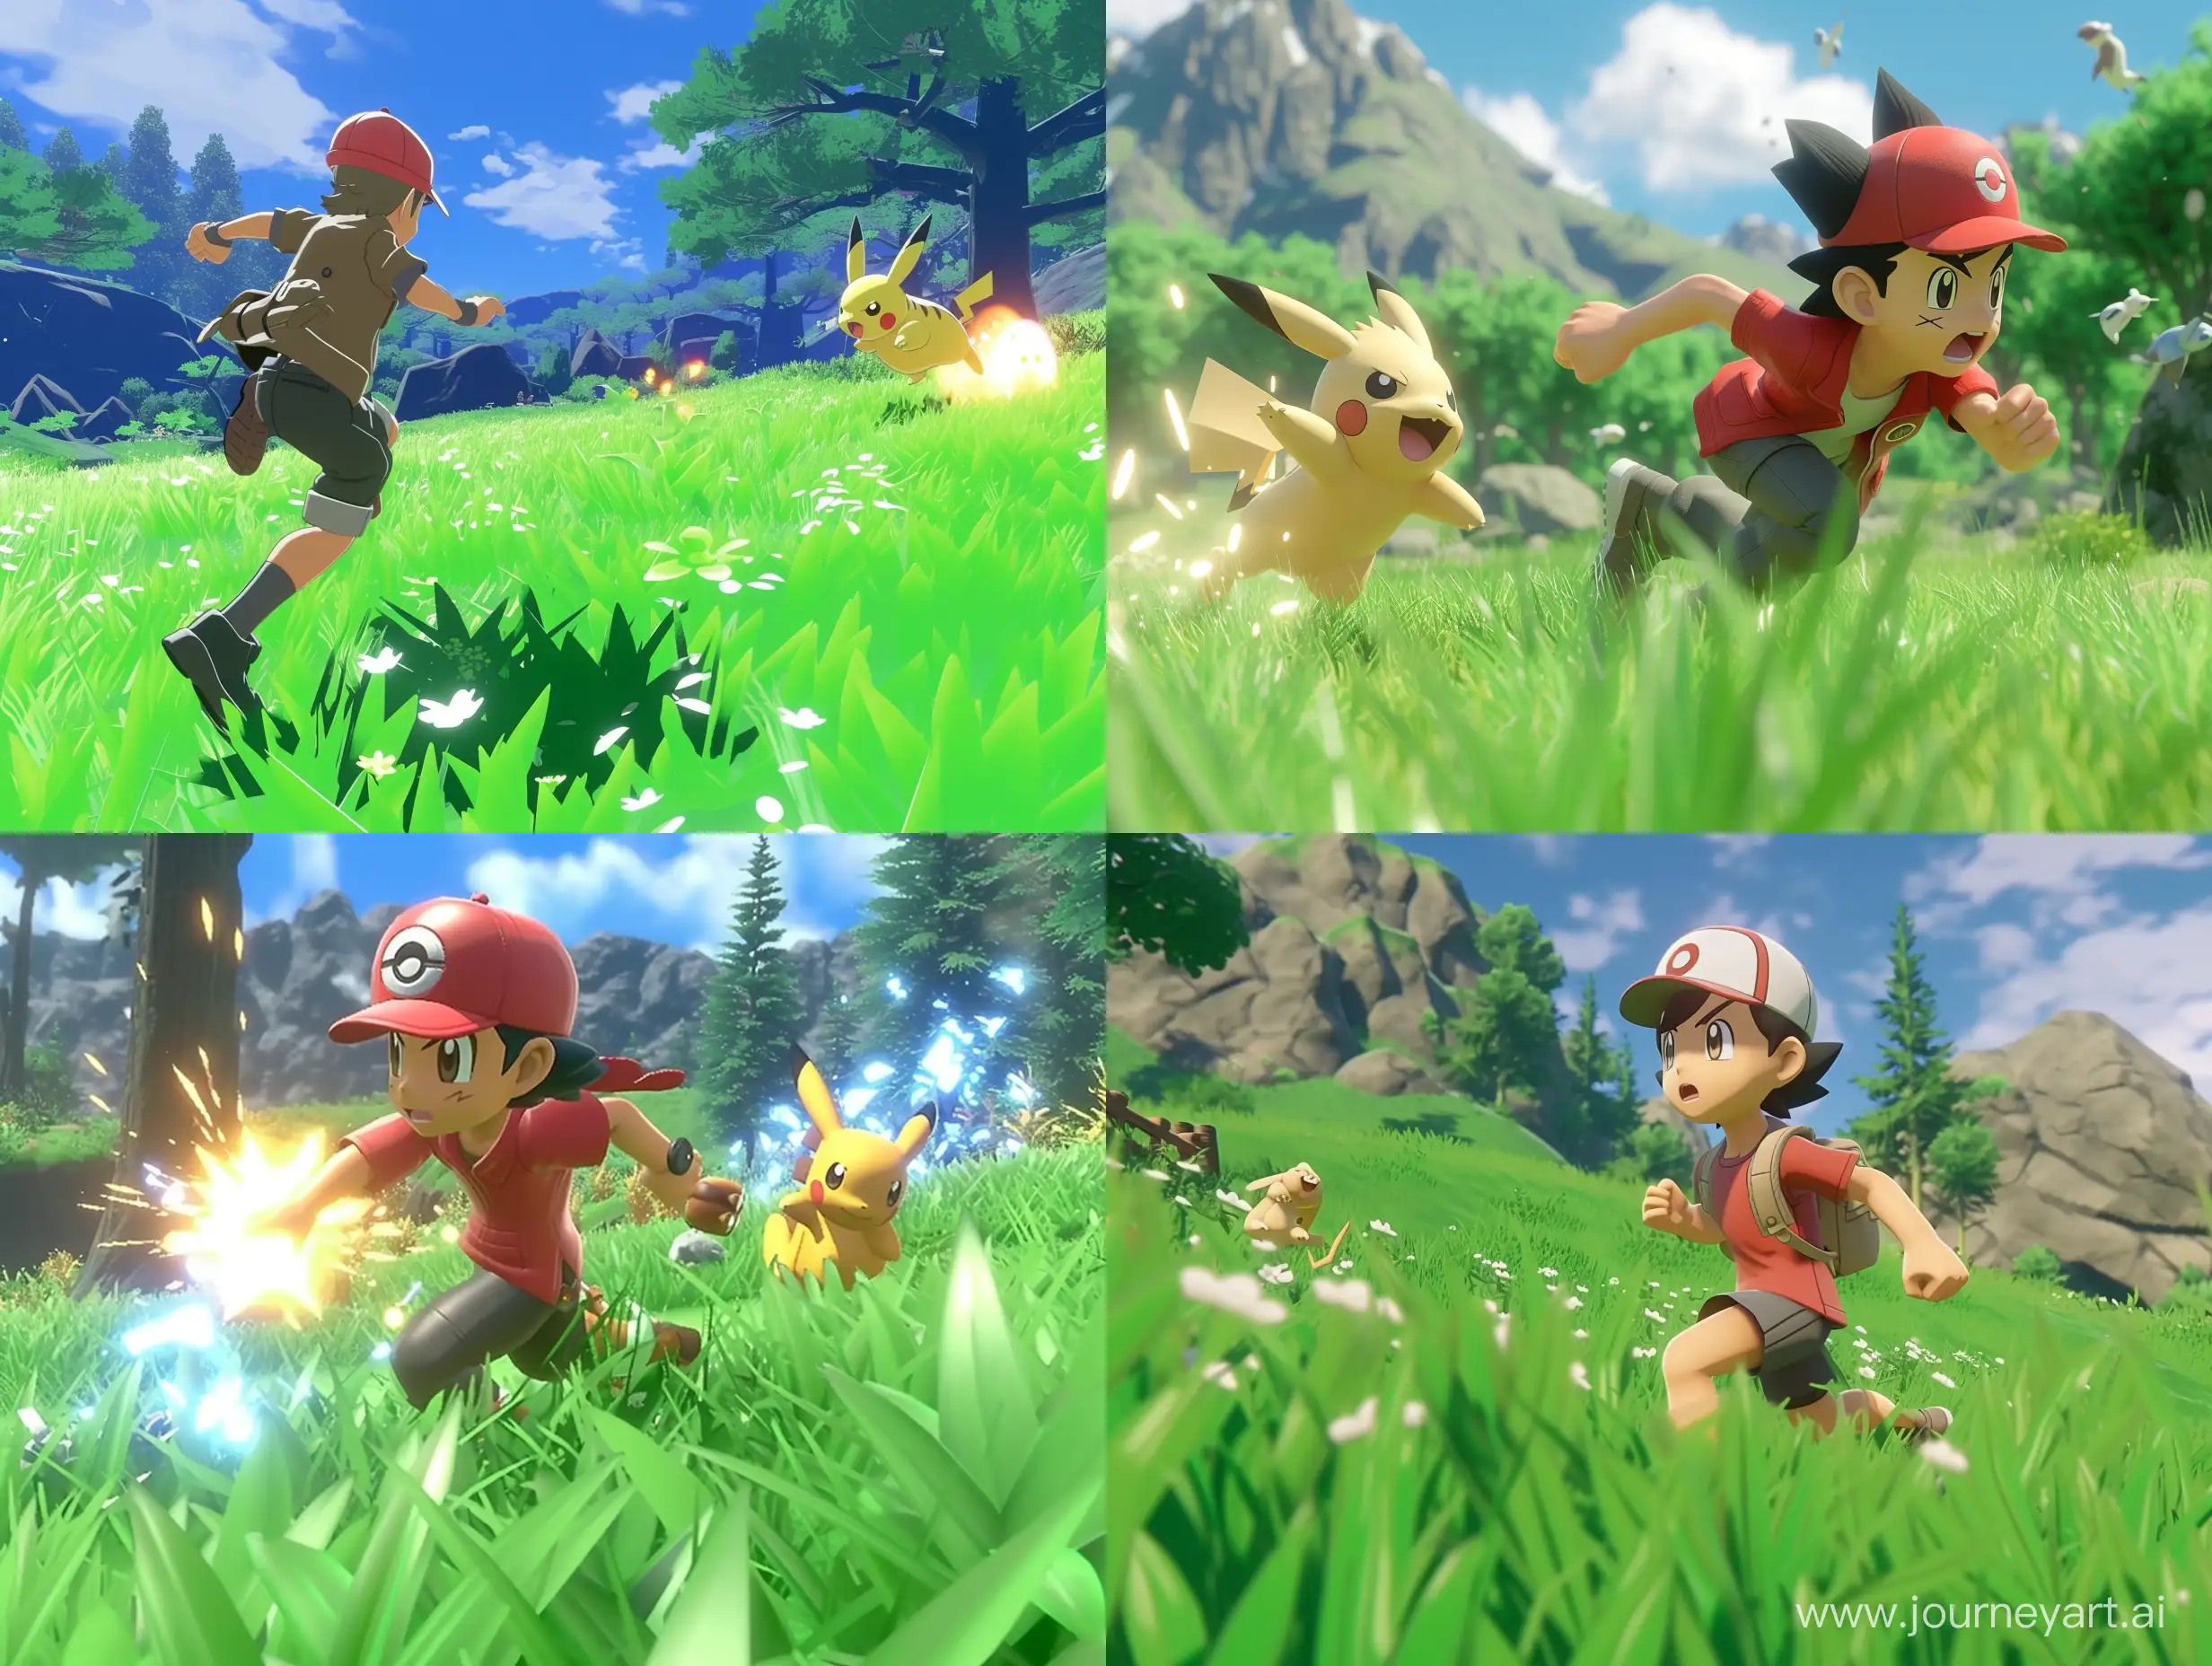 Game screenshot of a Pokemon nintendo switch game, character running in grass, pokemon fighting, 3d animated, nintendo style